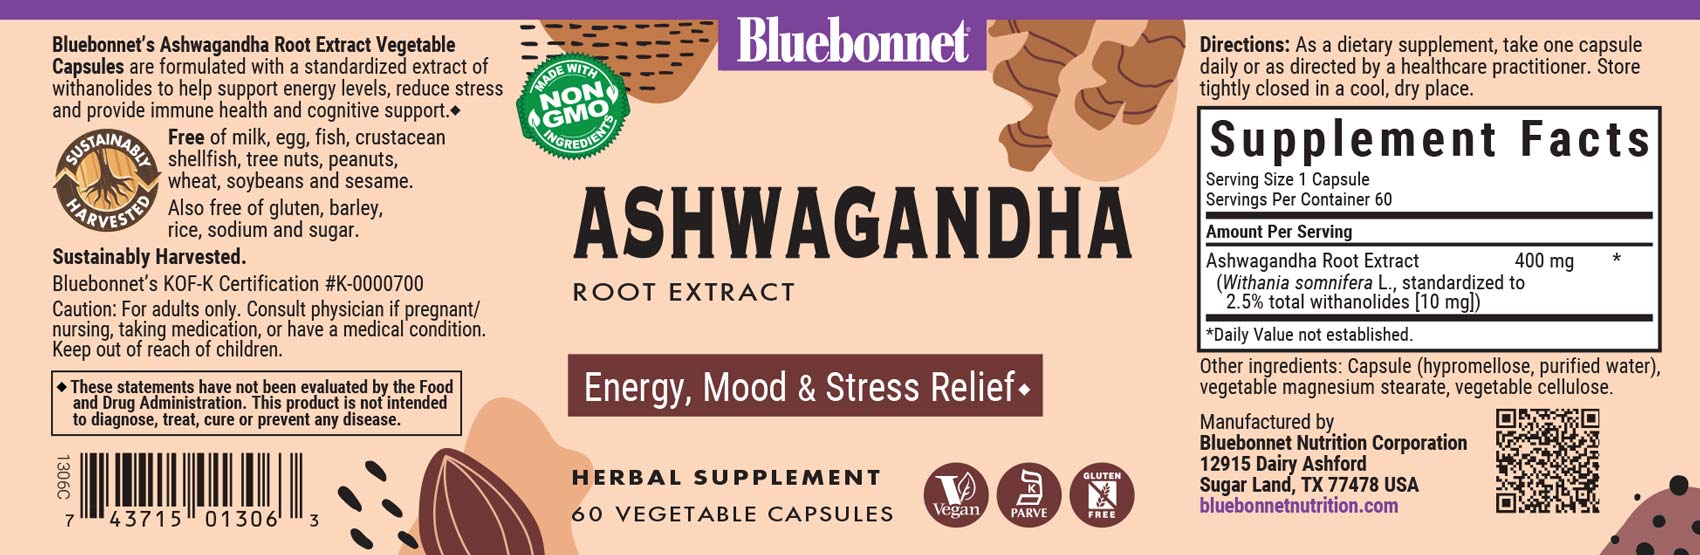 Bluebonnet's Ashwagandha Root Extract. 60 vegetable capsules